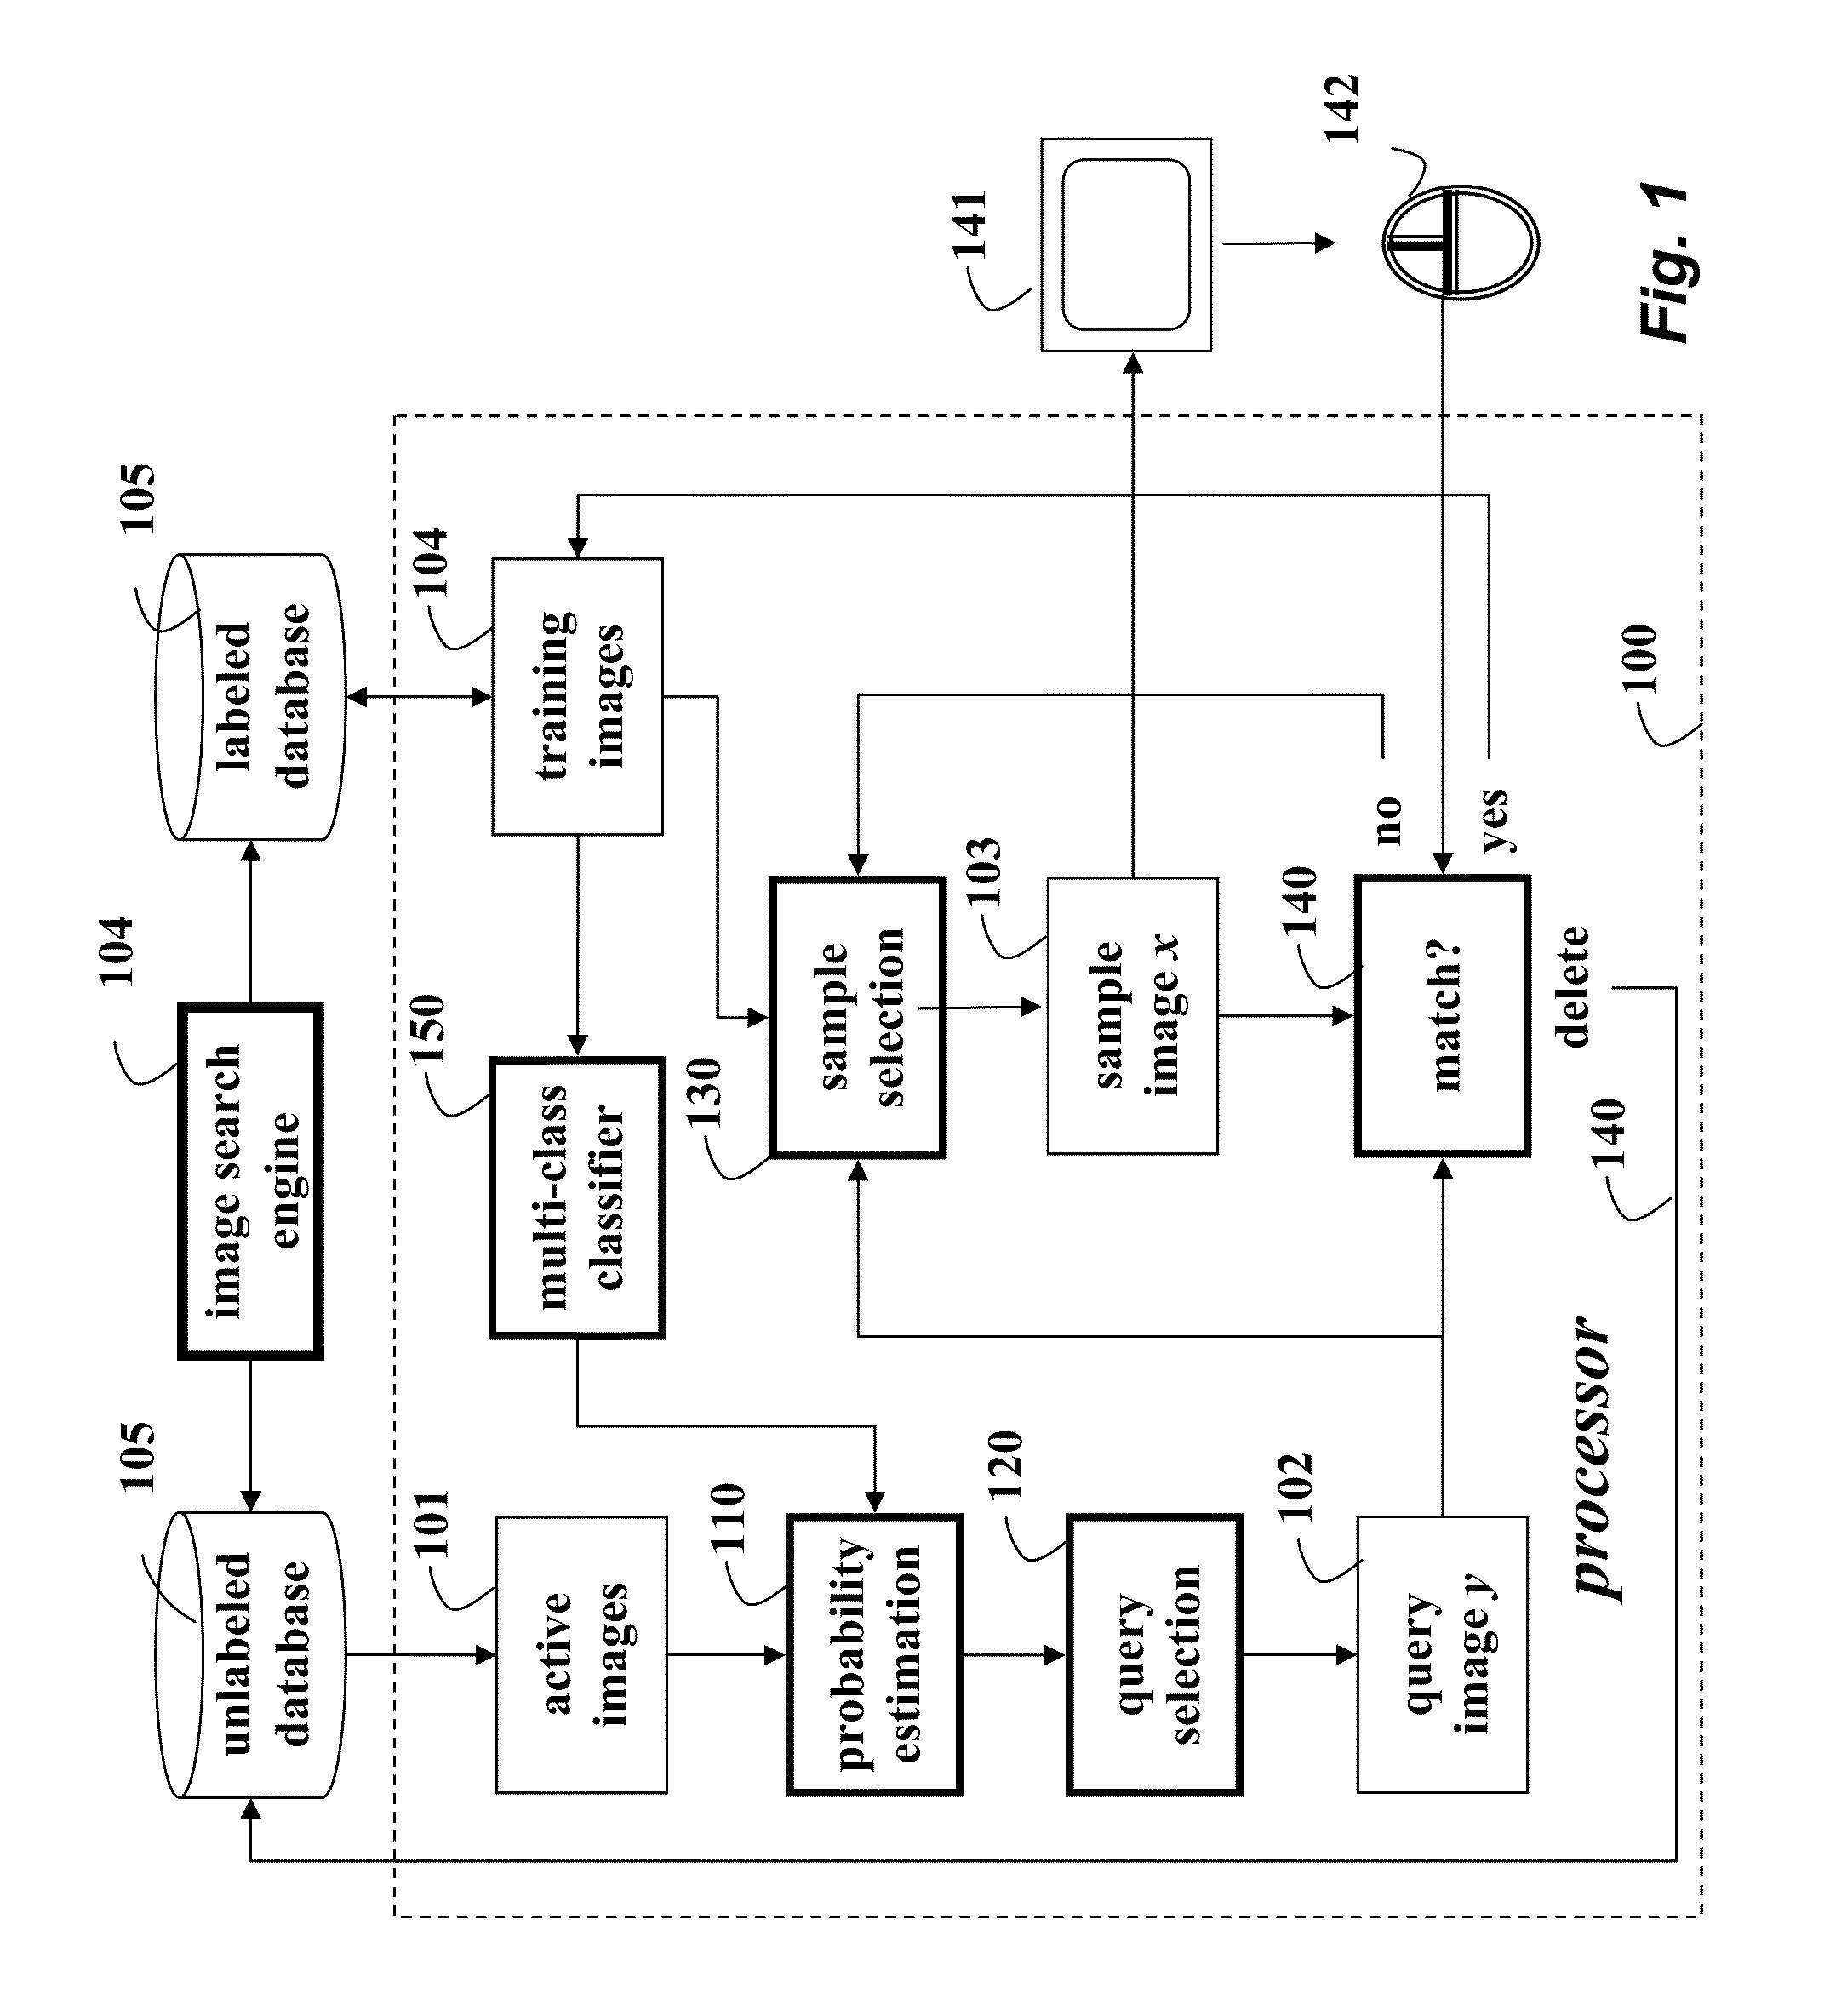 Method for Training Multi-Class Classifiers with Active Selection and Binary Feedback